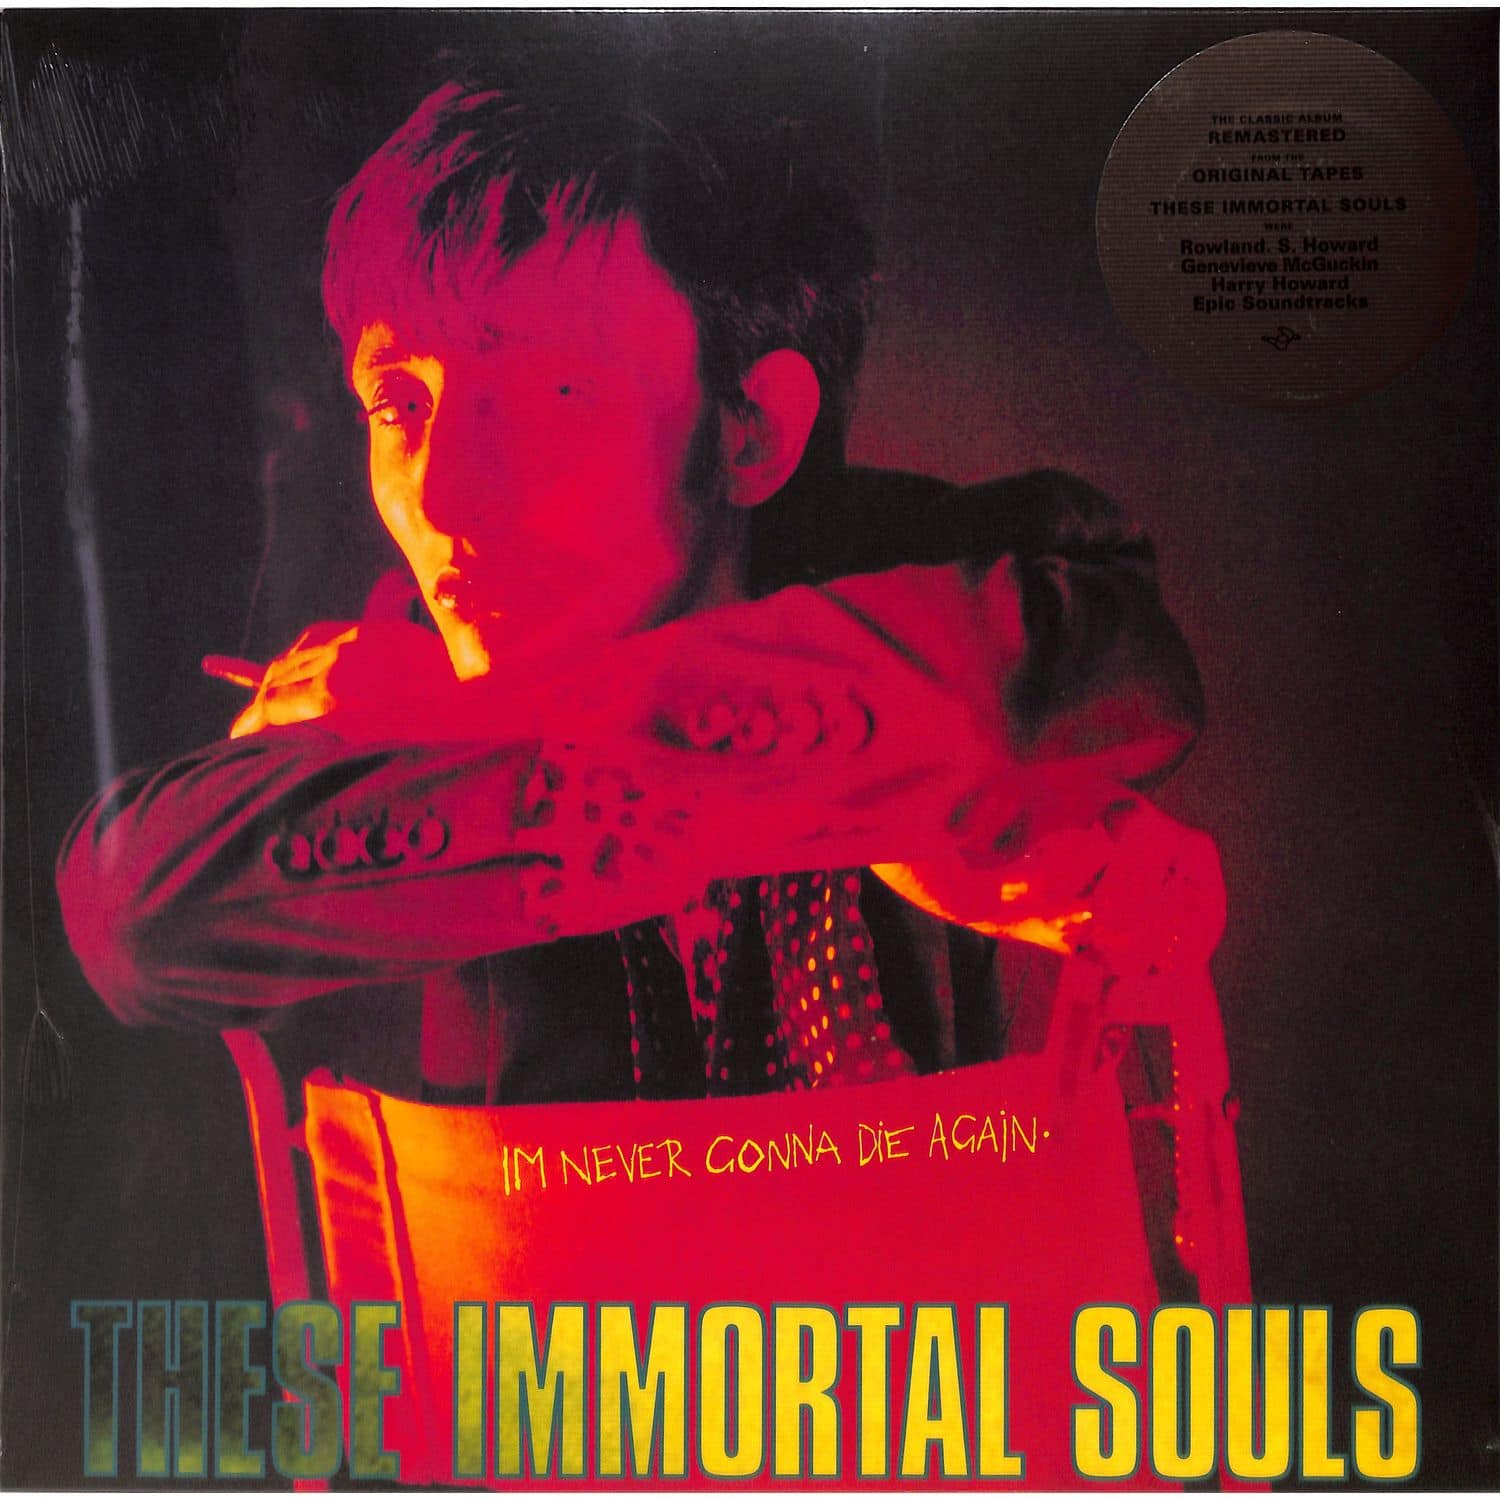 These Immortal Souls - I M NEVER GONNA DIE AGAIN 